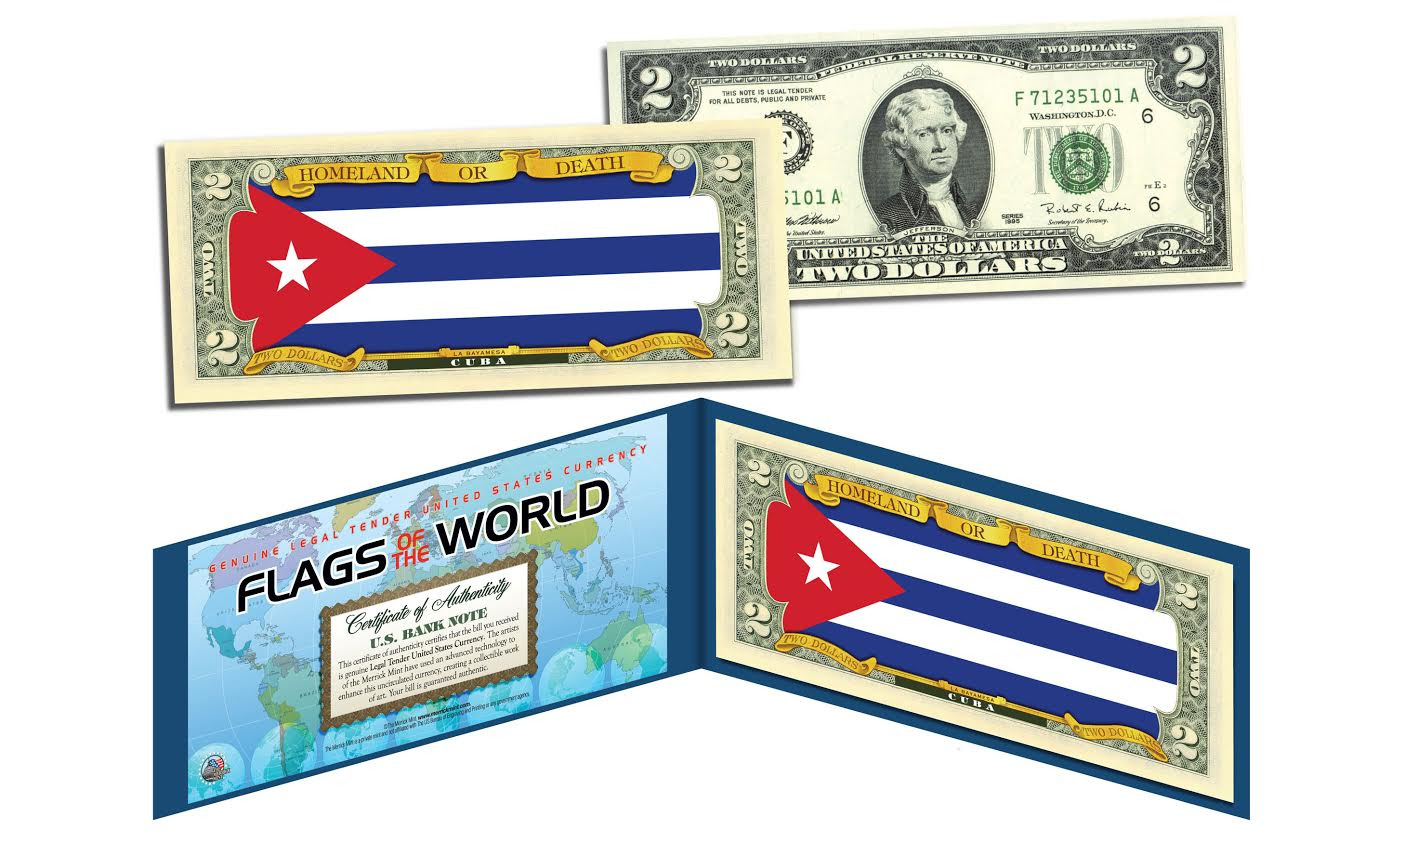 CUBA - Flags of the World Genuine Legal Tender U.S. $2 Bill Currency